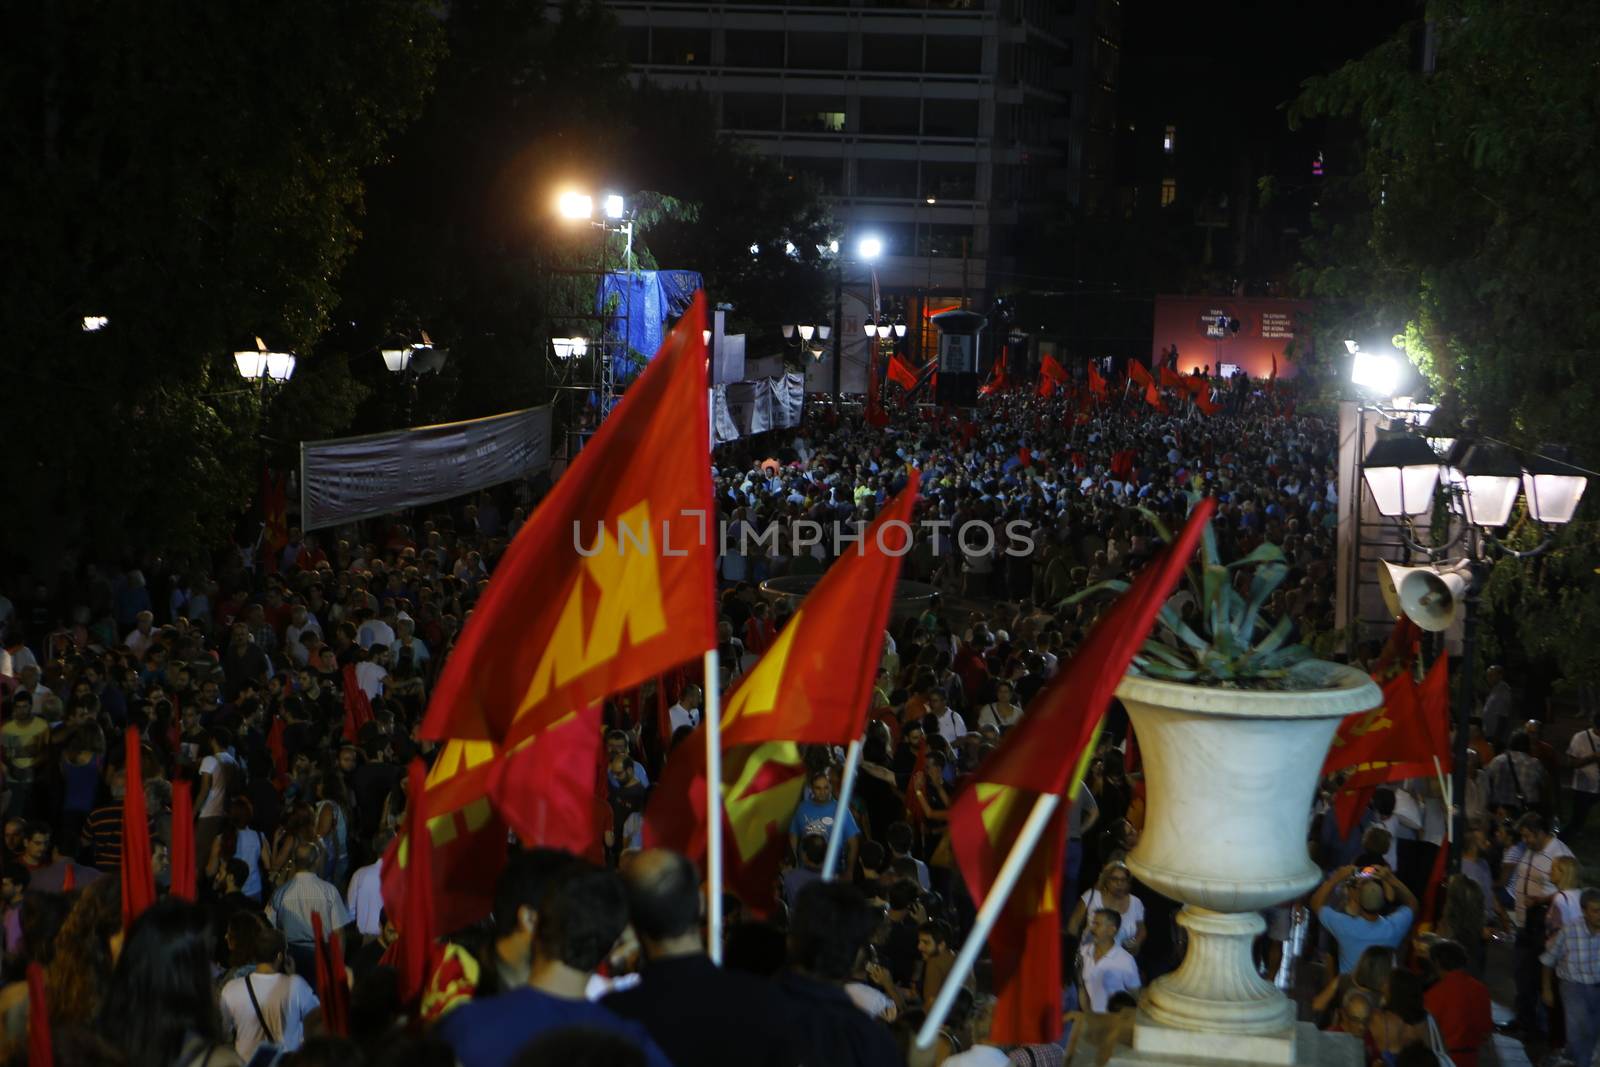 GREECE, Athens: The Communist Party of Greece (KKE) holds a massive campaign rally at Syntagma Square in Athens on September 16, 2015, ahead of the forthcoming snap elections on September 20. Thousands reportedly attended the rally, where KKE General Secretary Dimitris Koutsoumpas addressed supporters.